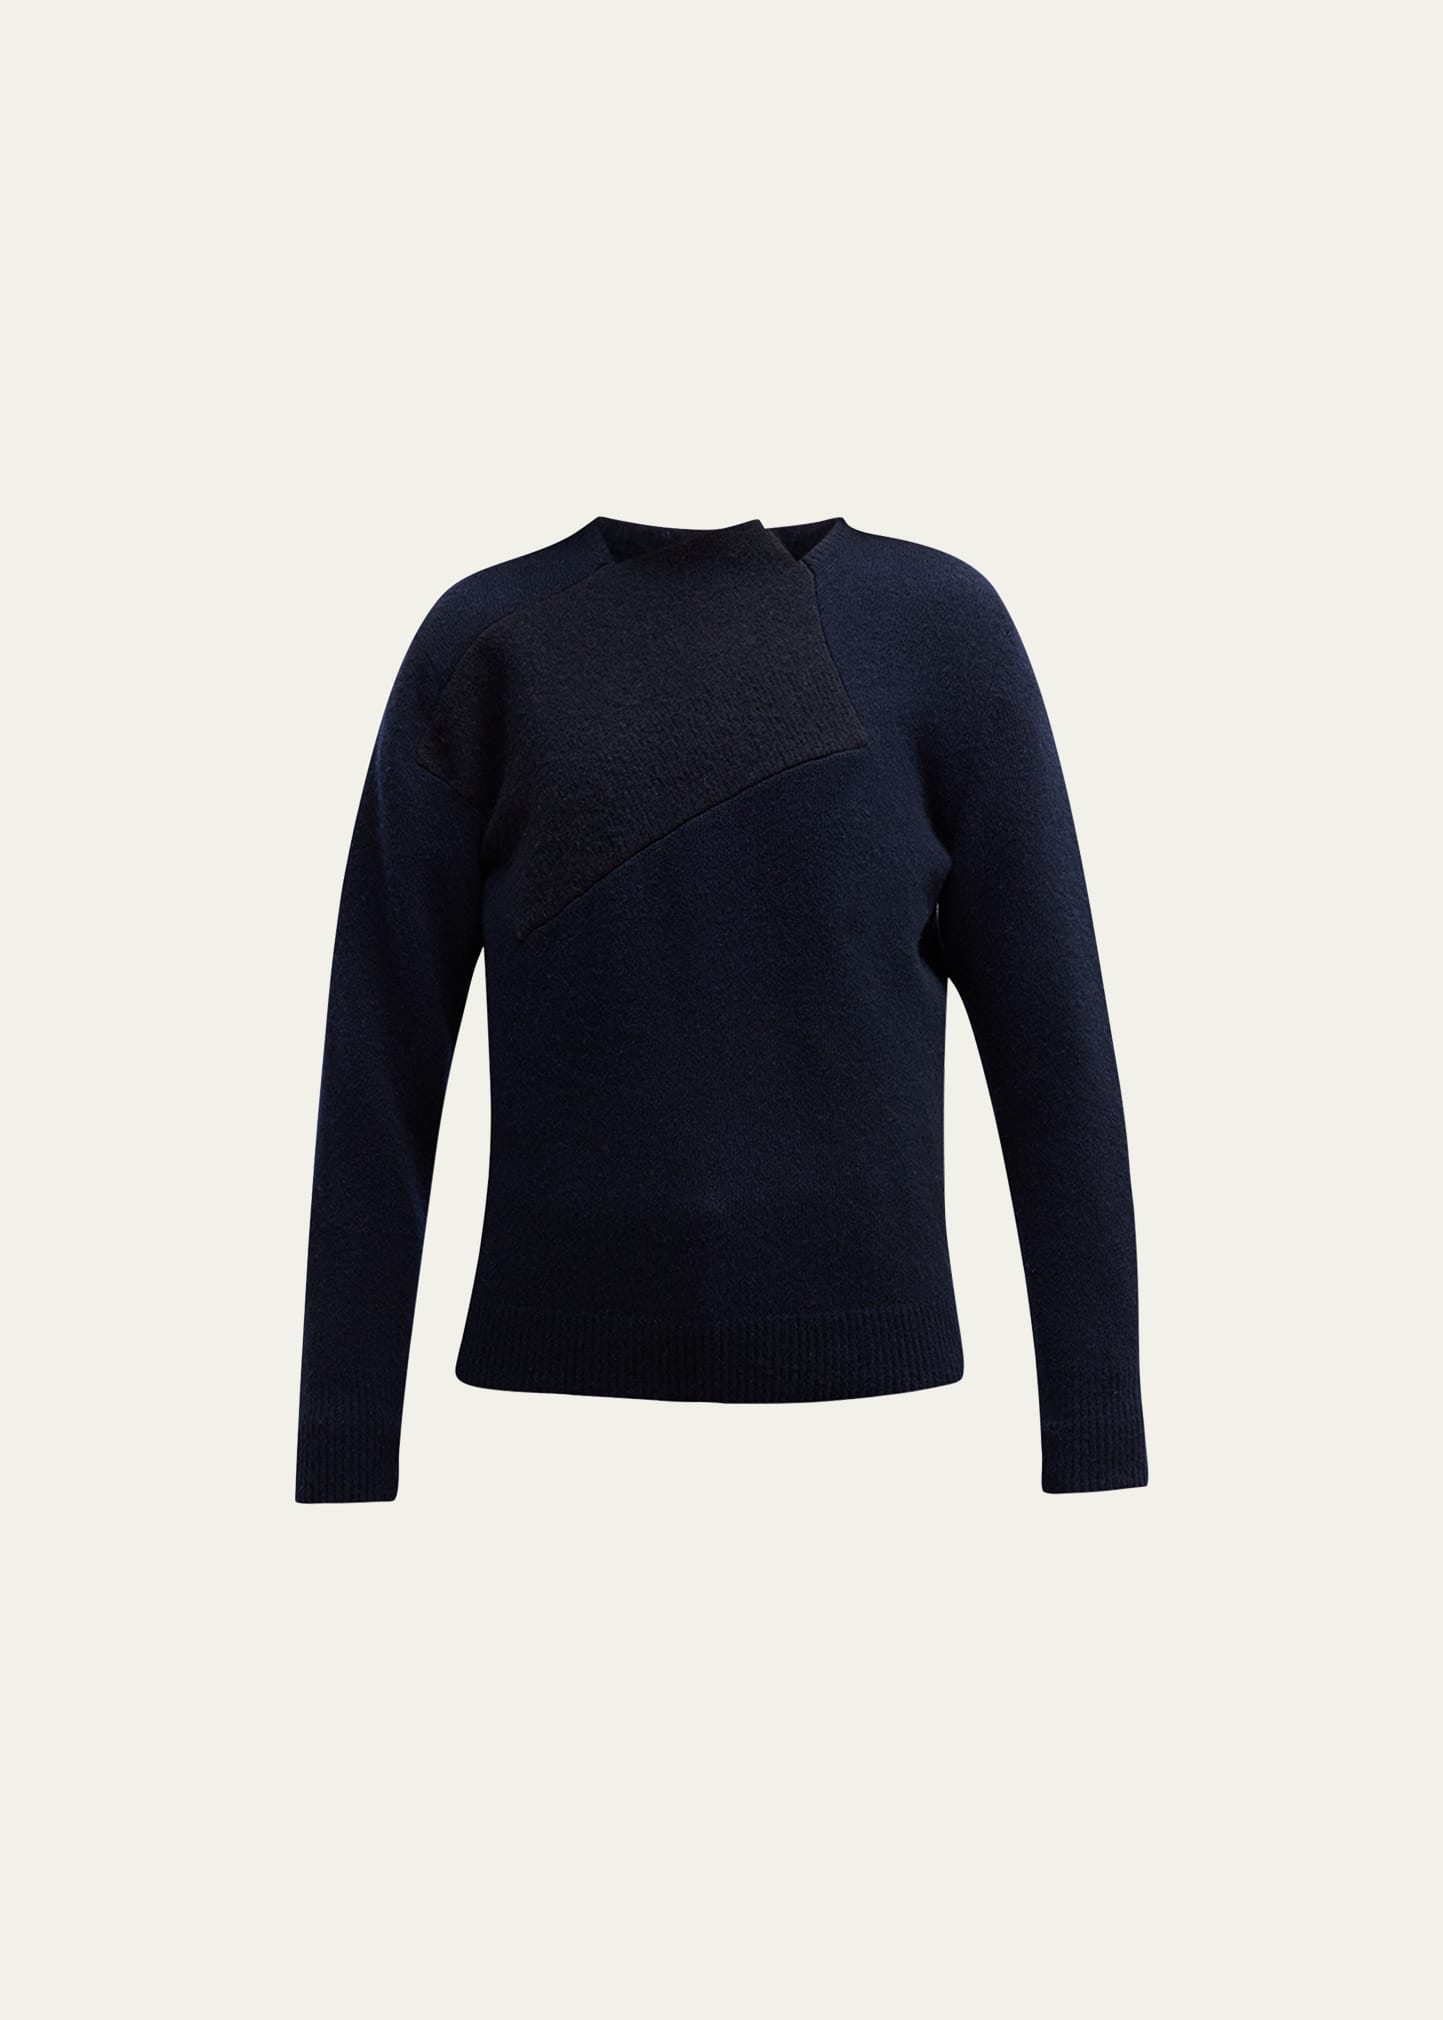 Shop The Row Enid Shrunken Wool Cashmere Top With Contrast Patch In Dark Navy